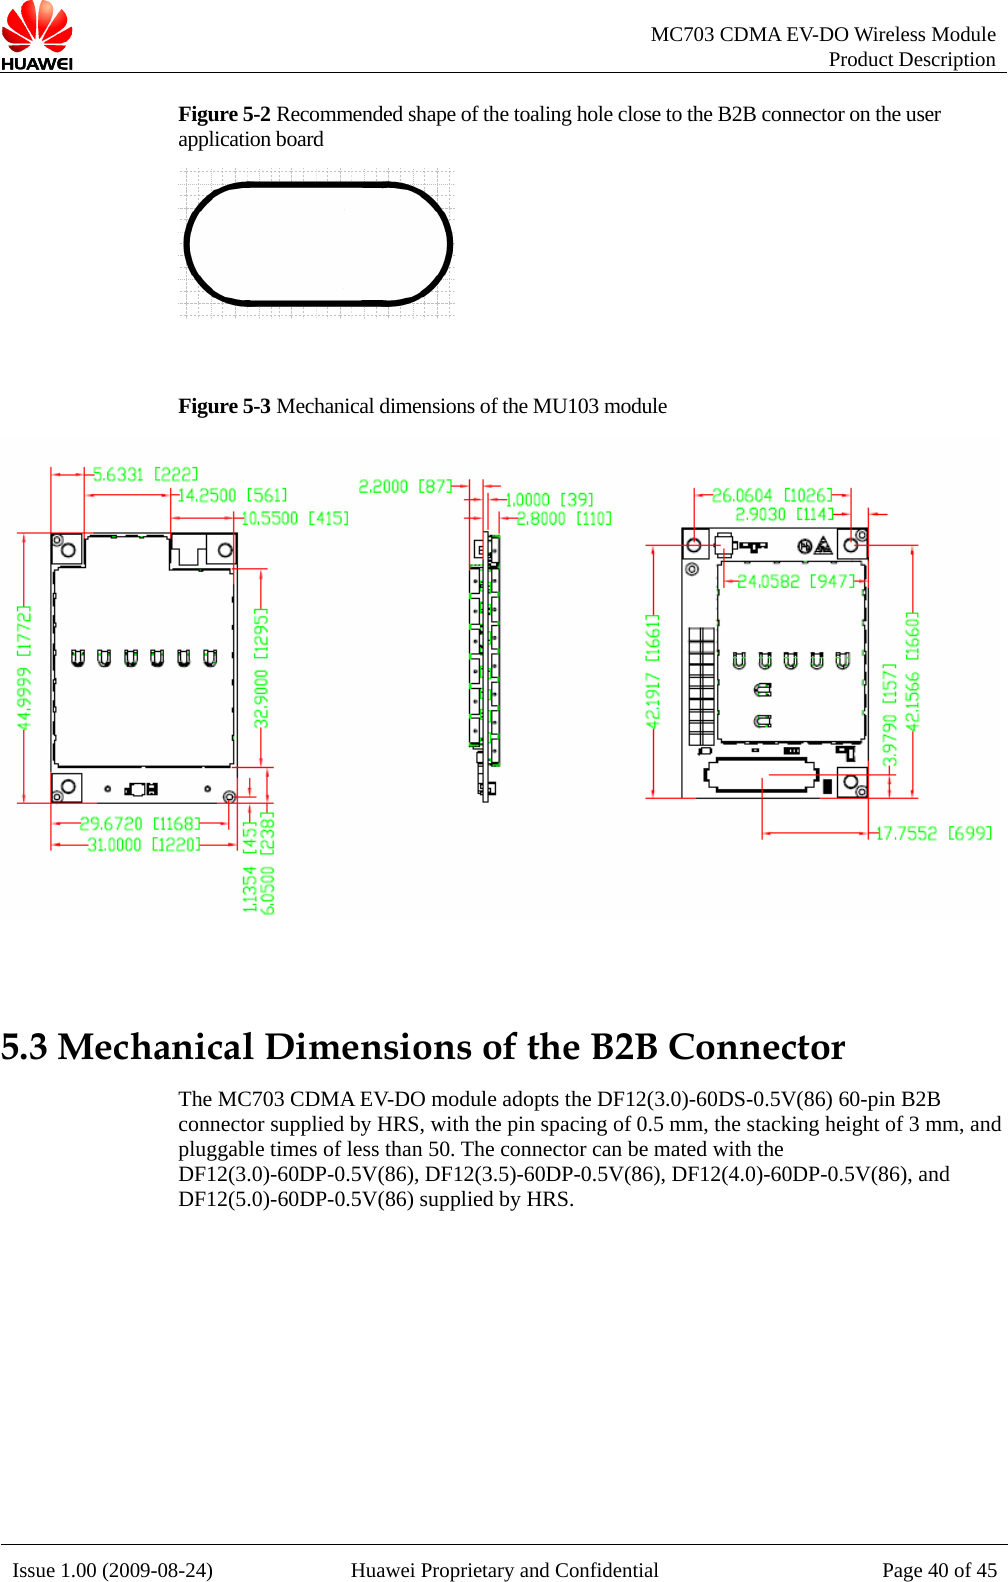   MC703 CDMA EV-DO Wireless Module Product Description Issue 1.00 (2009-08-24)  Huawei Proprietary and Confidential Page 40 of 45Figure 5-2 Recommended shape of the toaling hole close to the B2B connector on the user application board   Figure 5-3 Mechanical dimensions of the MU103 module   5.3 Mechanical Dimensions of the B2B Connector The MC703 CDMA EV-DO module adopts the DF12(3.0)-60DS-0.5V(86) 60-pin B2B connector supplied by HRS, with the pin spacing of 0.5 mm, the stacking height of 3 mm, and pluggable times of less than 50. The connector can be mated with the DF12(3.0)-60DP-0.5V(86), DF12(3.5)-60DP-0.5V(86), DF12(4.0)-60DP-0.5V(86), and DF12(5.0)-60DP-0.5V(86) supplied by HRS.    